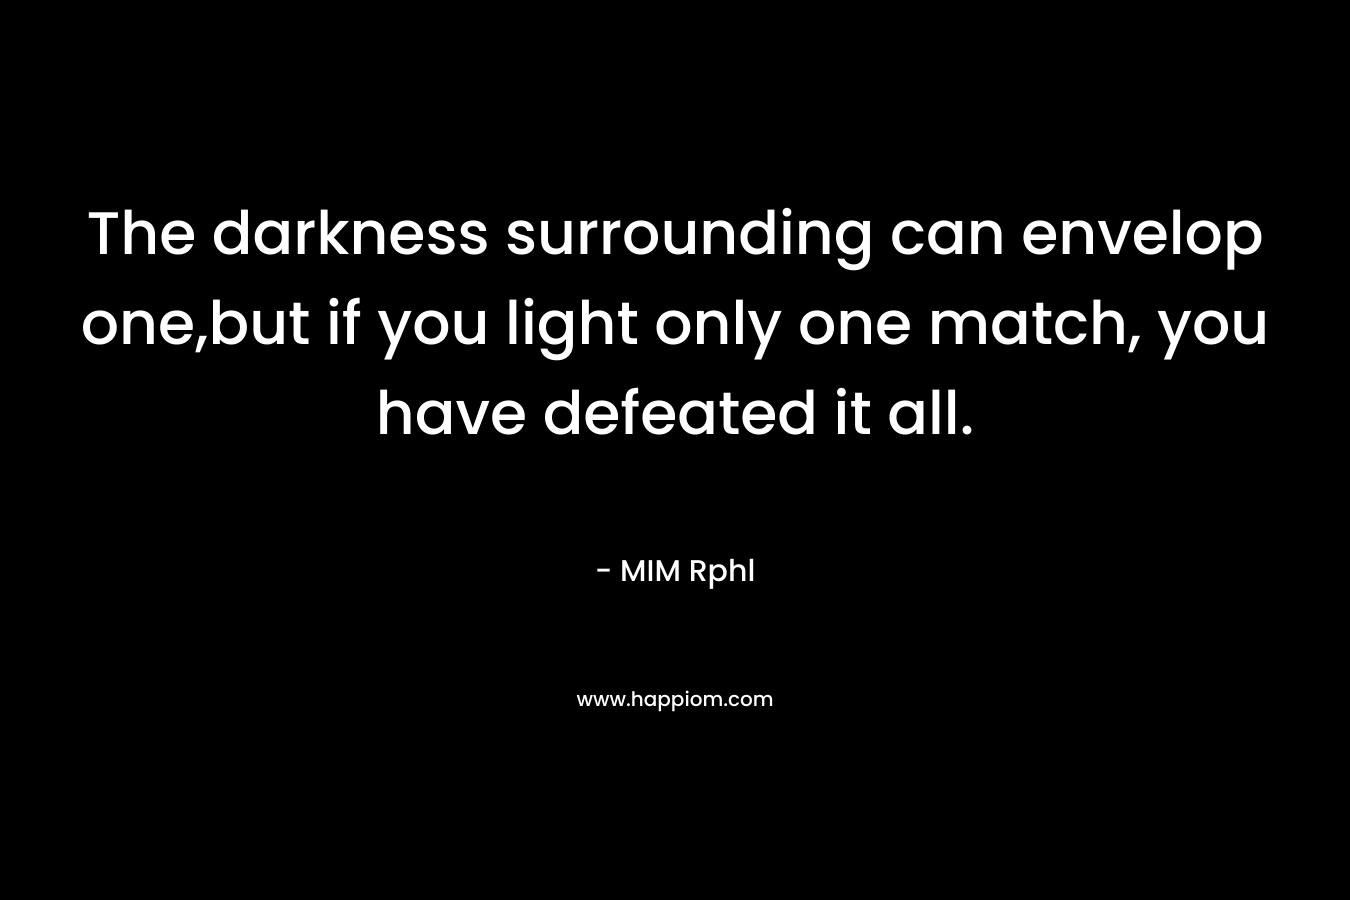 The darkness surrounding can envelop one,but if you light only one match, you have defeated it all.